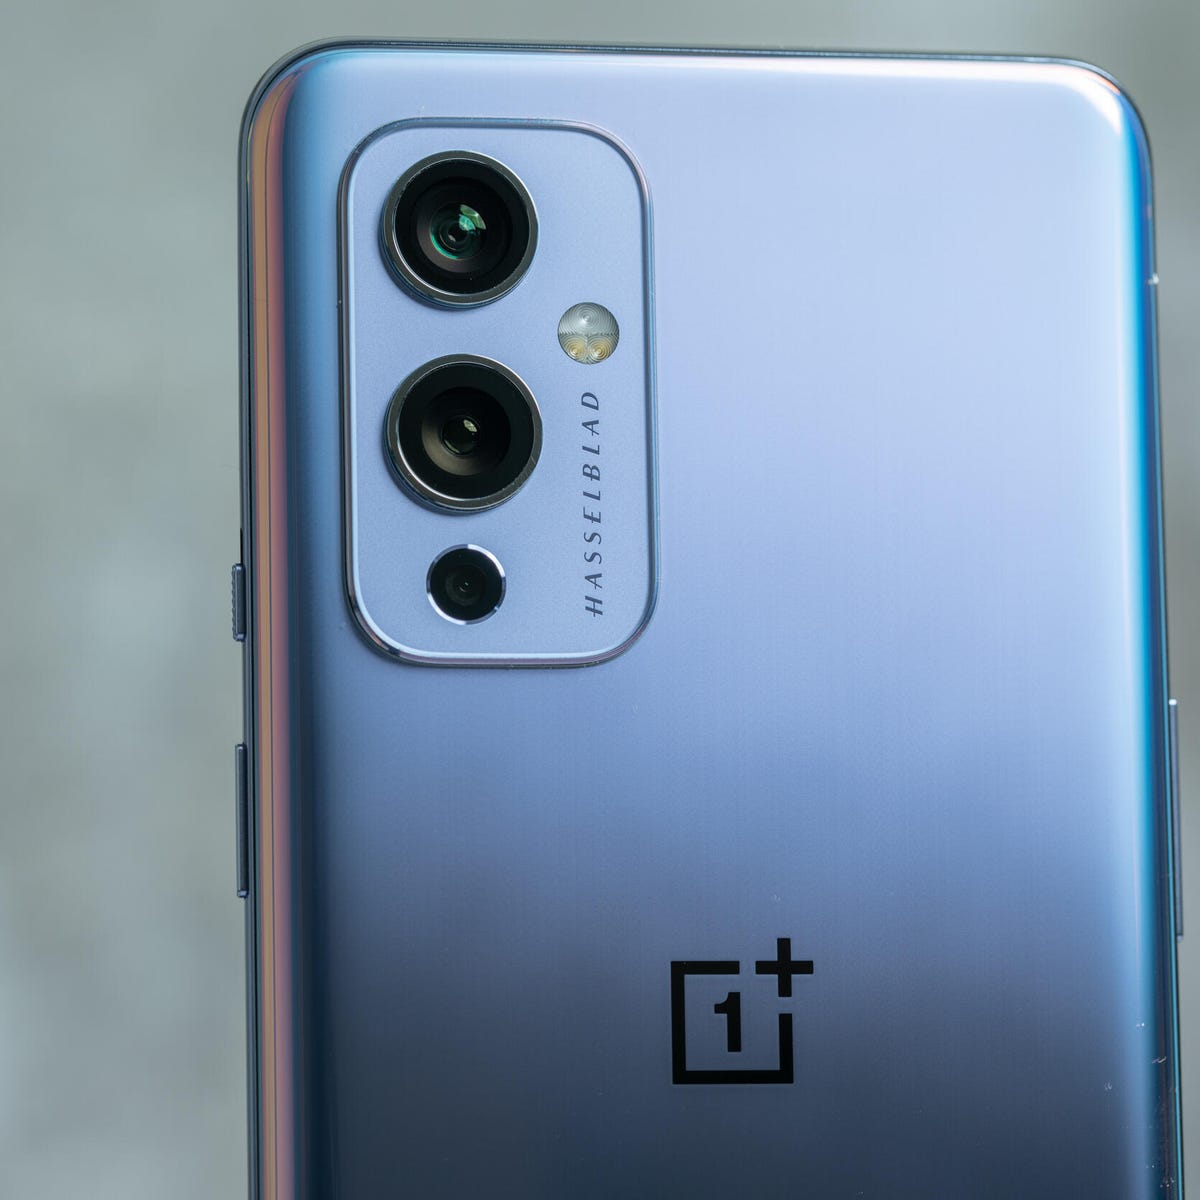 OnePlus 9 review: Is this phone still worth buying in 2022? - CNET